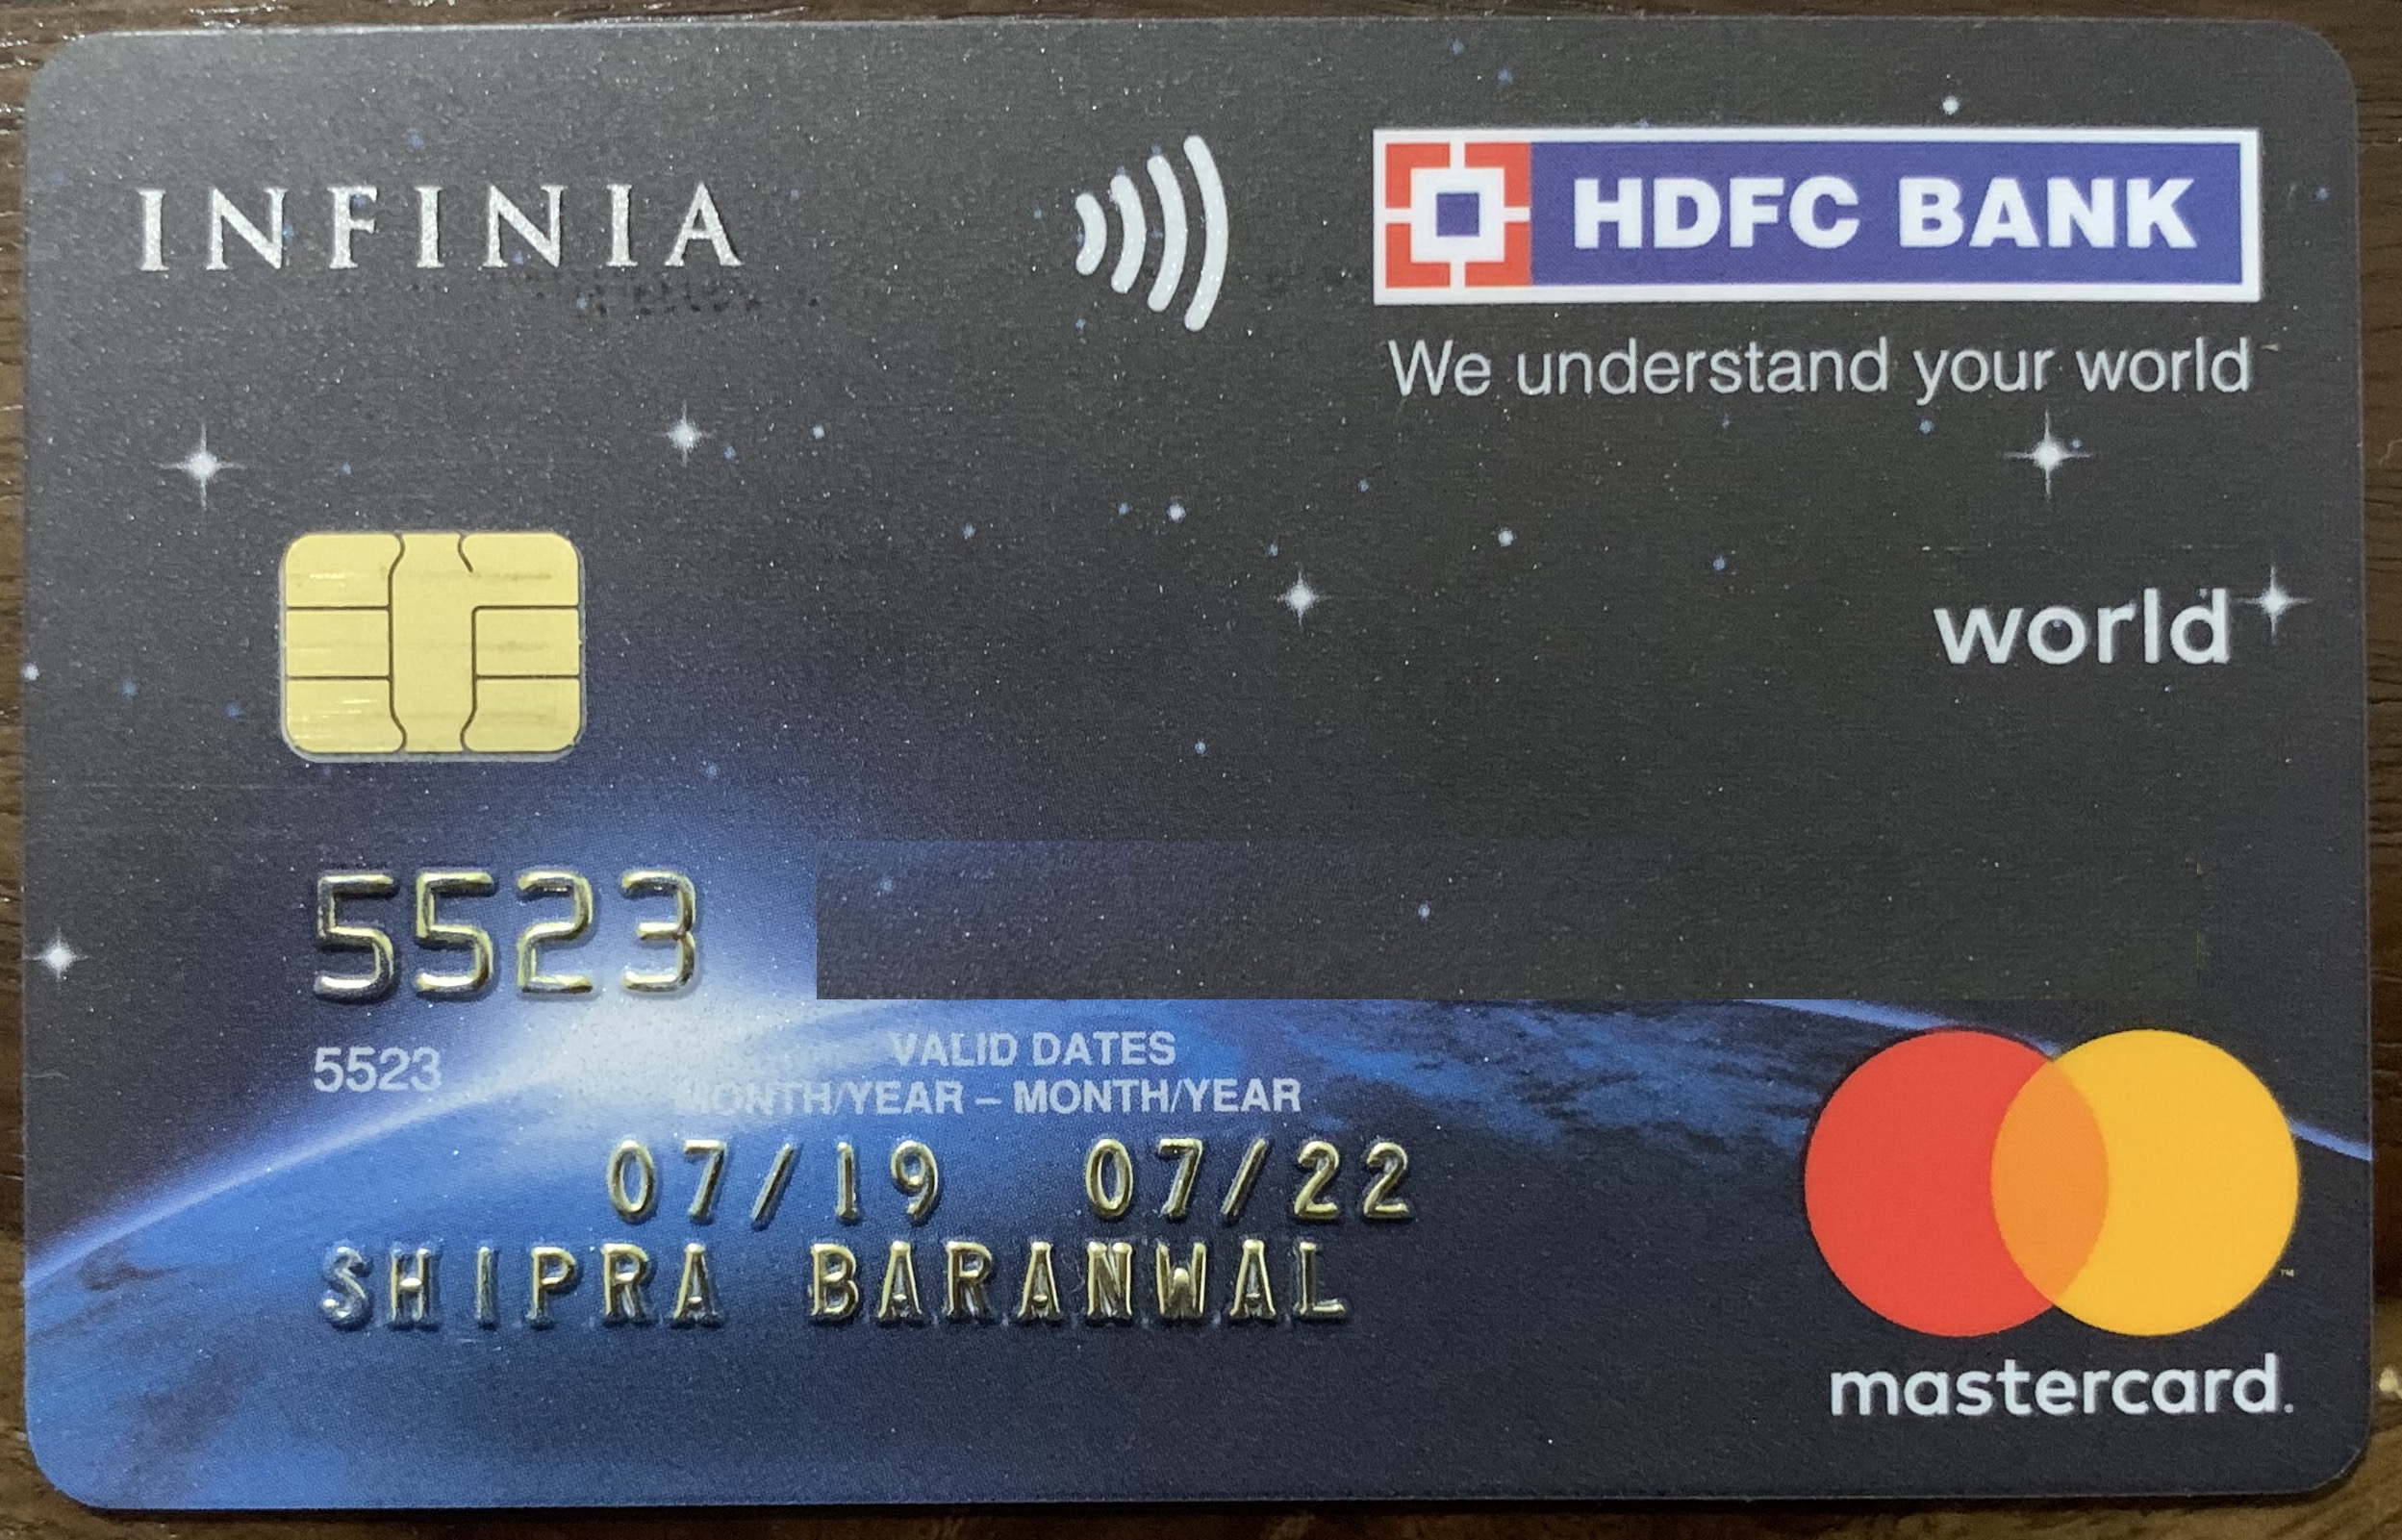 First Impressions Of The Hdfc Infinia Credit Card Live From A Lounge